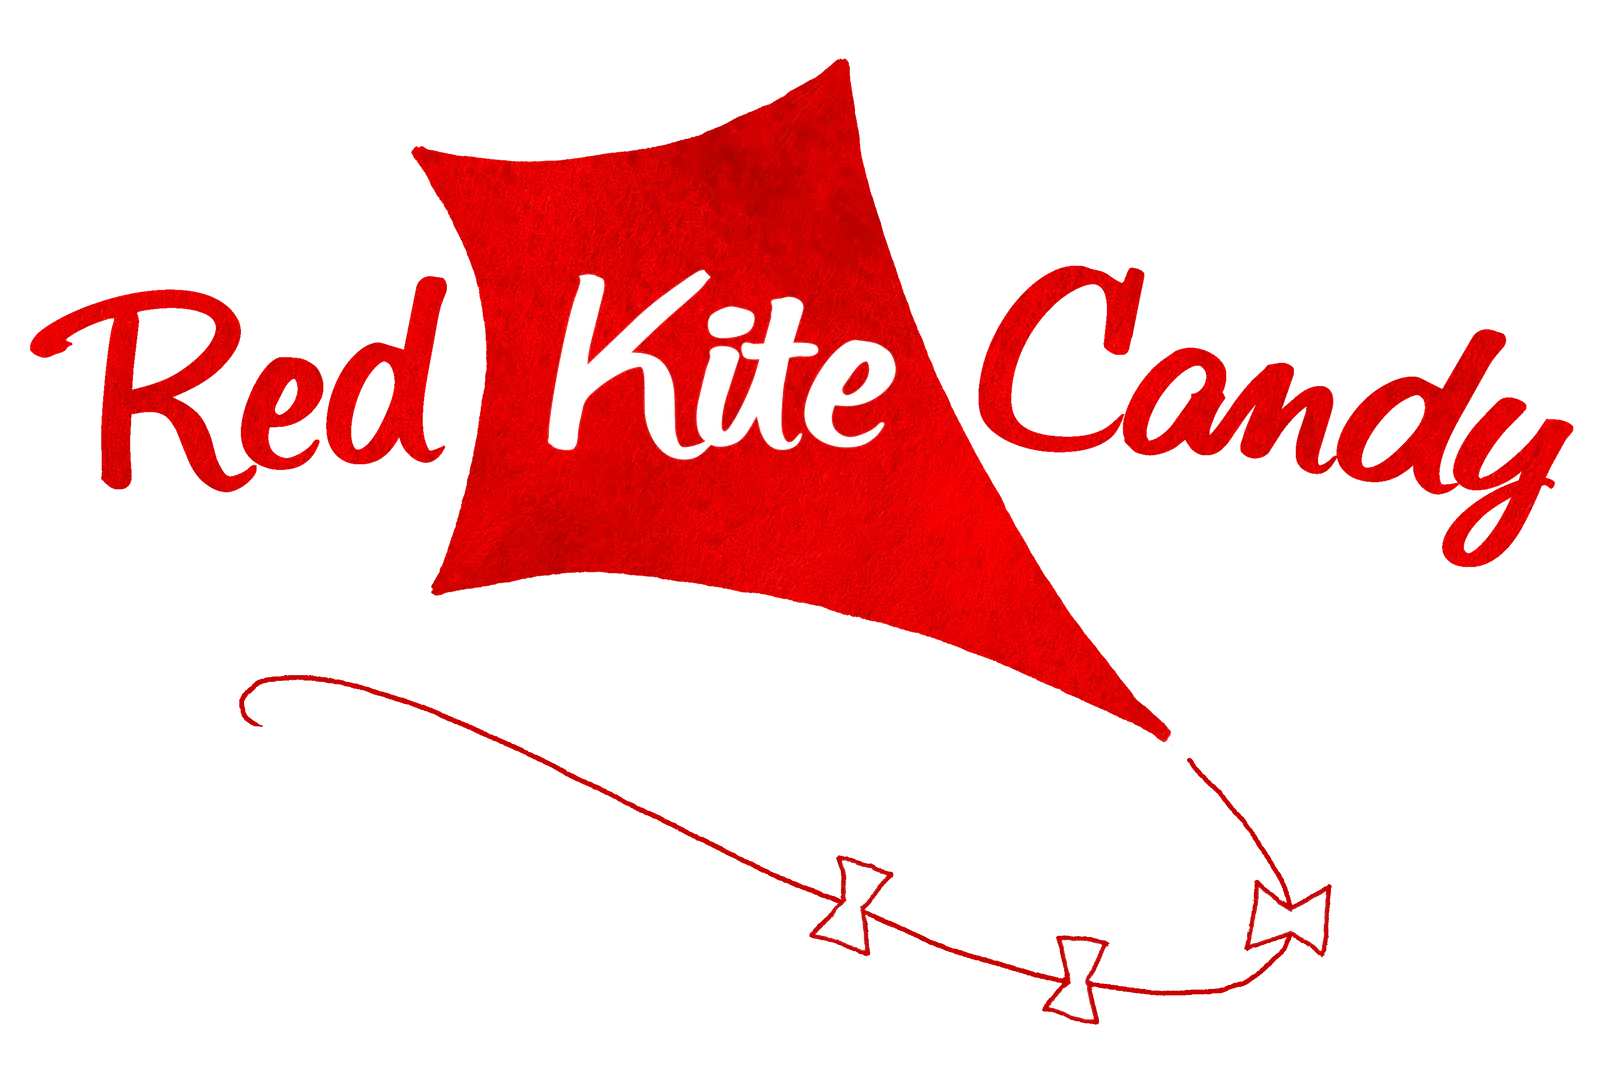 Red Kite Candy